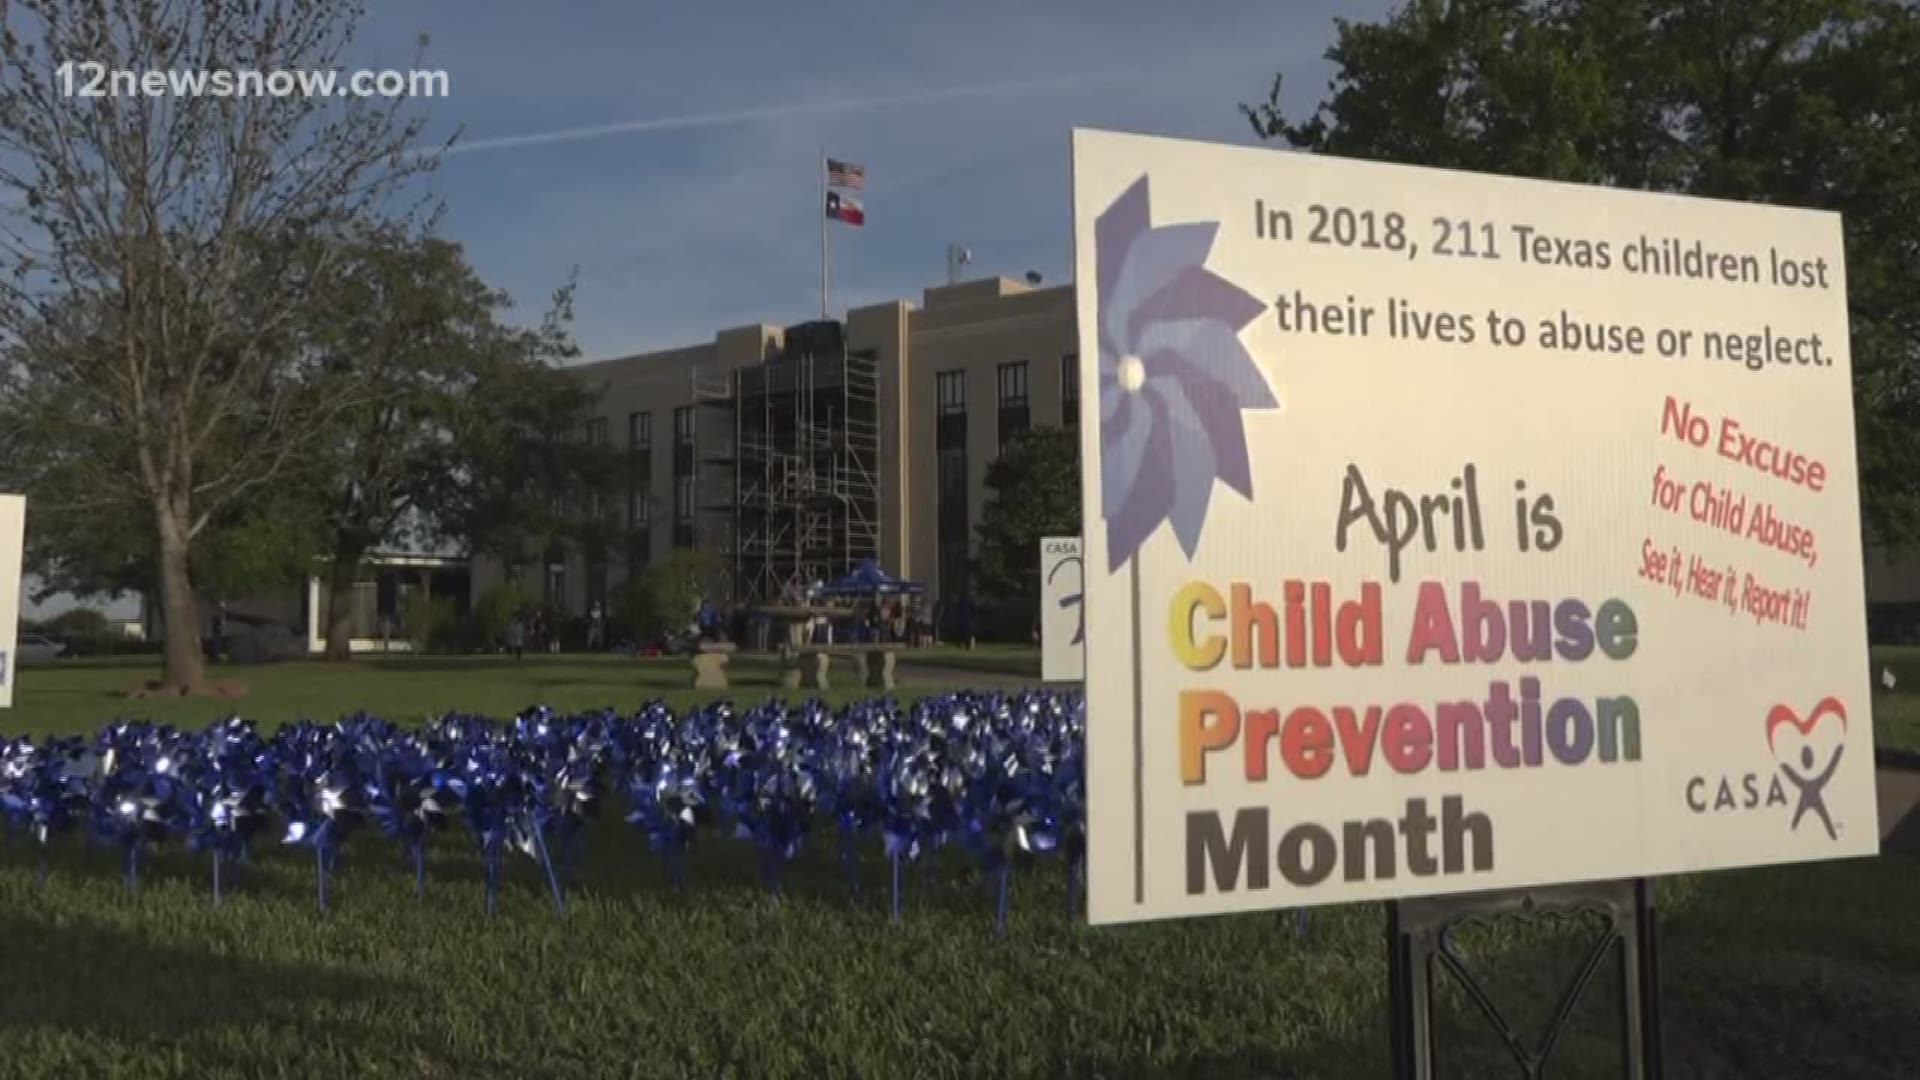 Texas saw 211 child deaths in 2018 due to abuse and neglect.